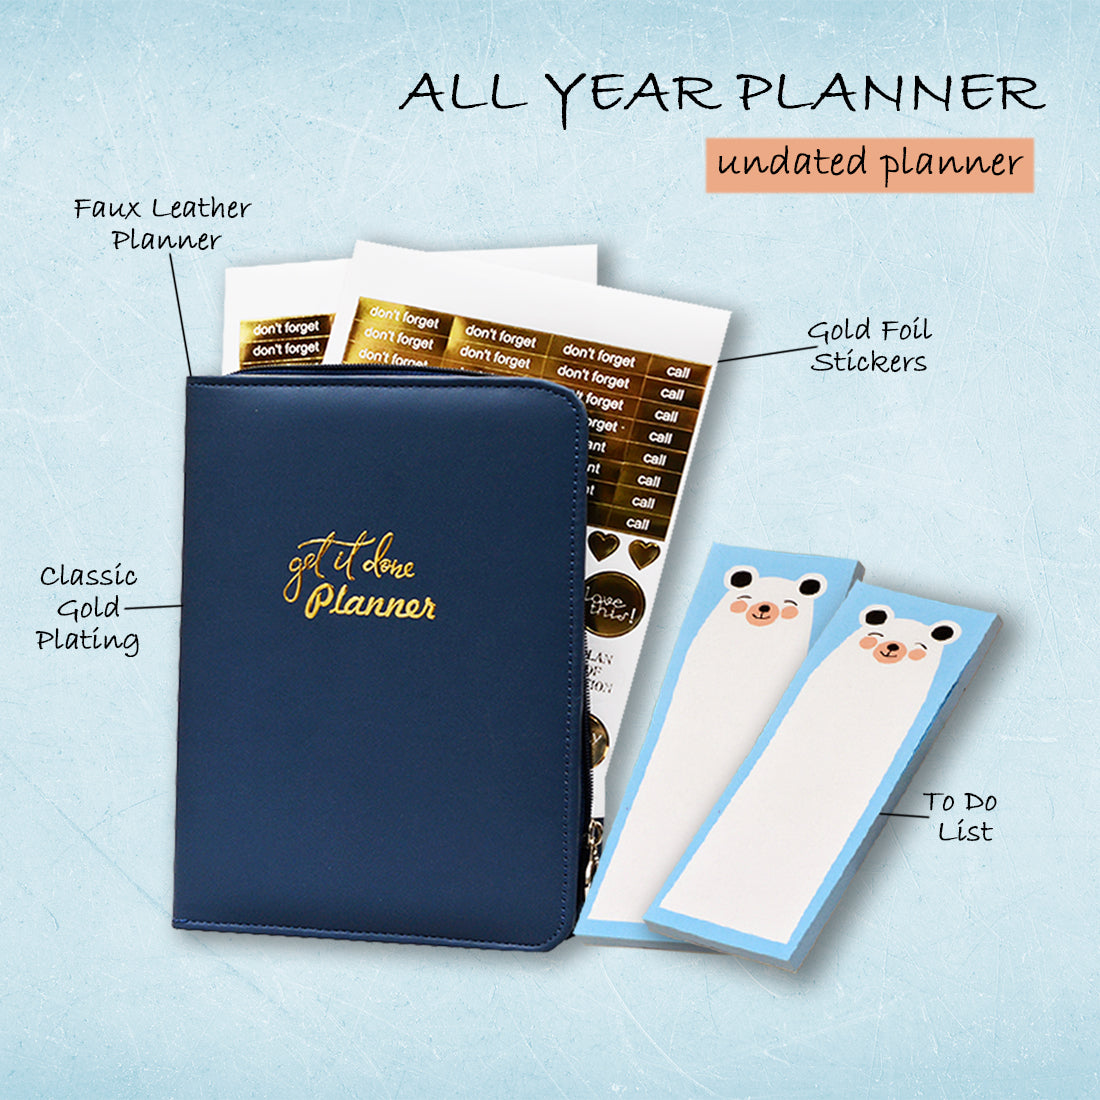 Executive Blue Corporate Undated business diary / Organizer Planner Set with To - Do - List